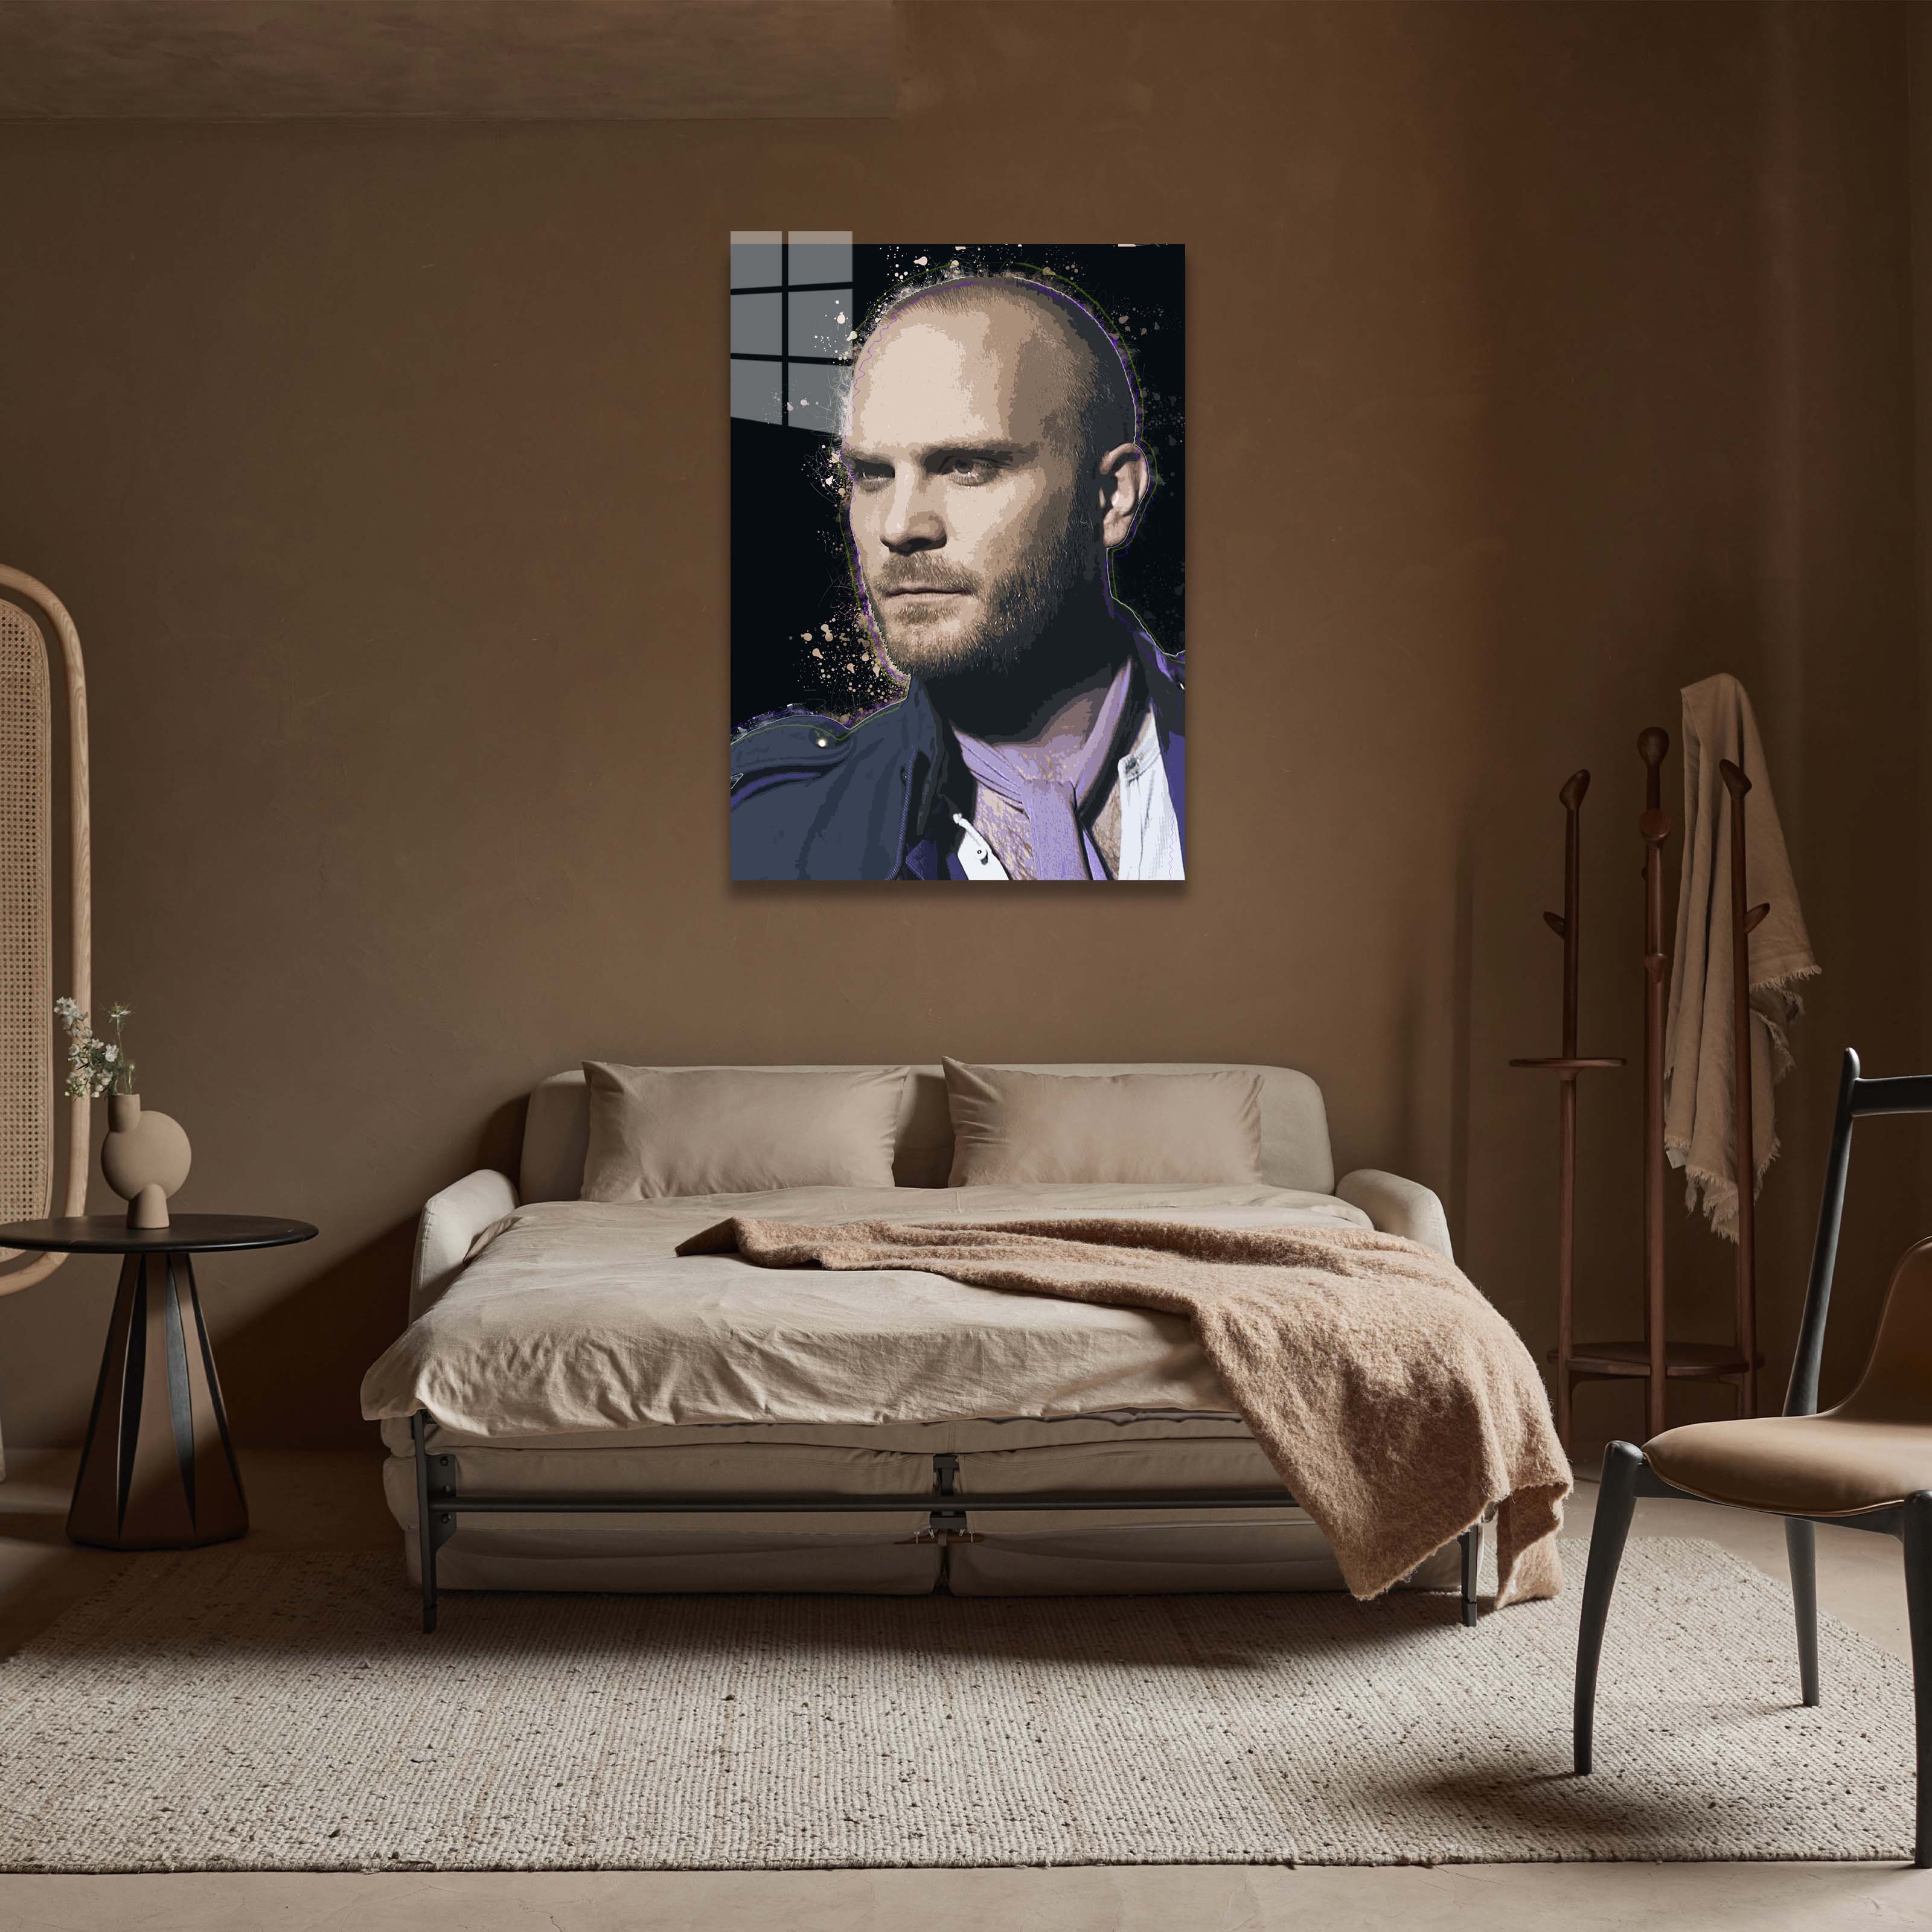 WILL CHAMPION- coldplay-designed by @rizal.az